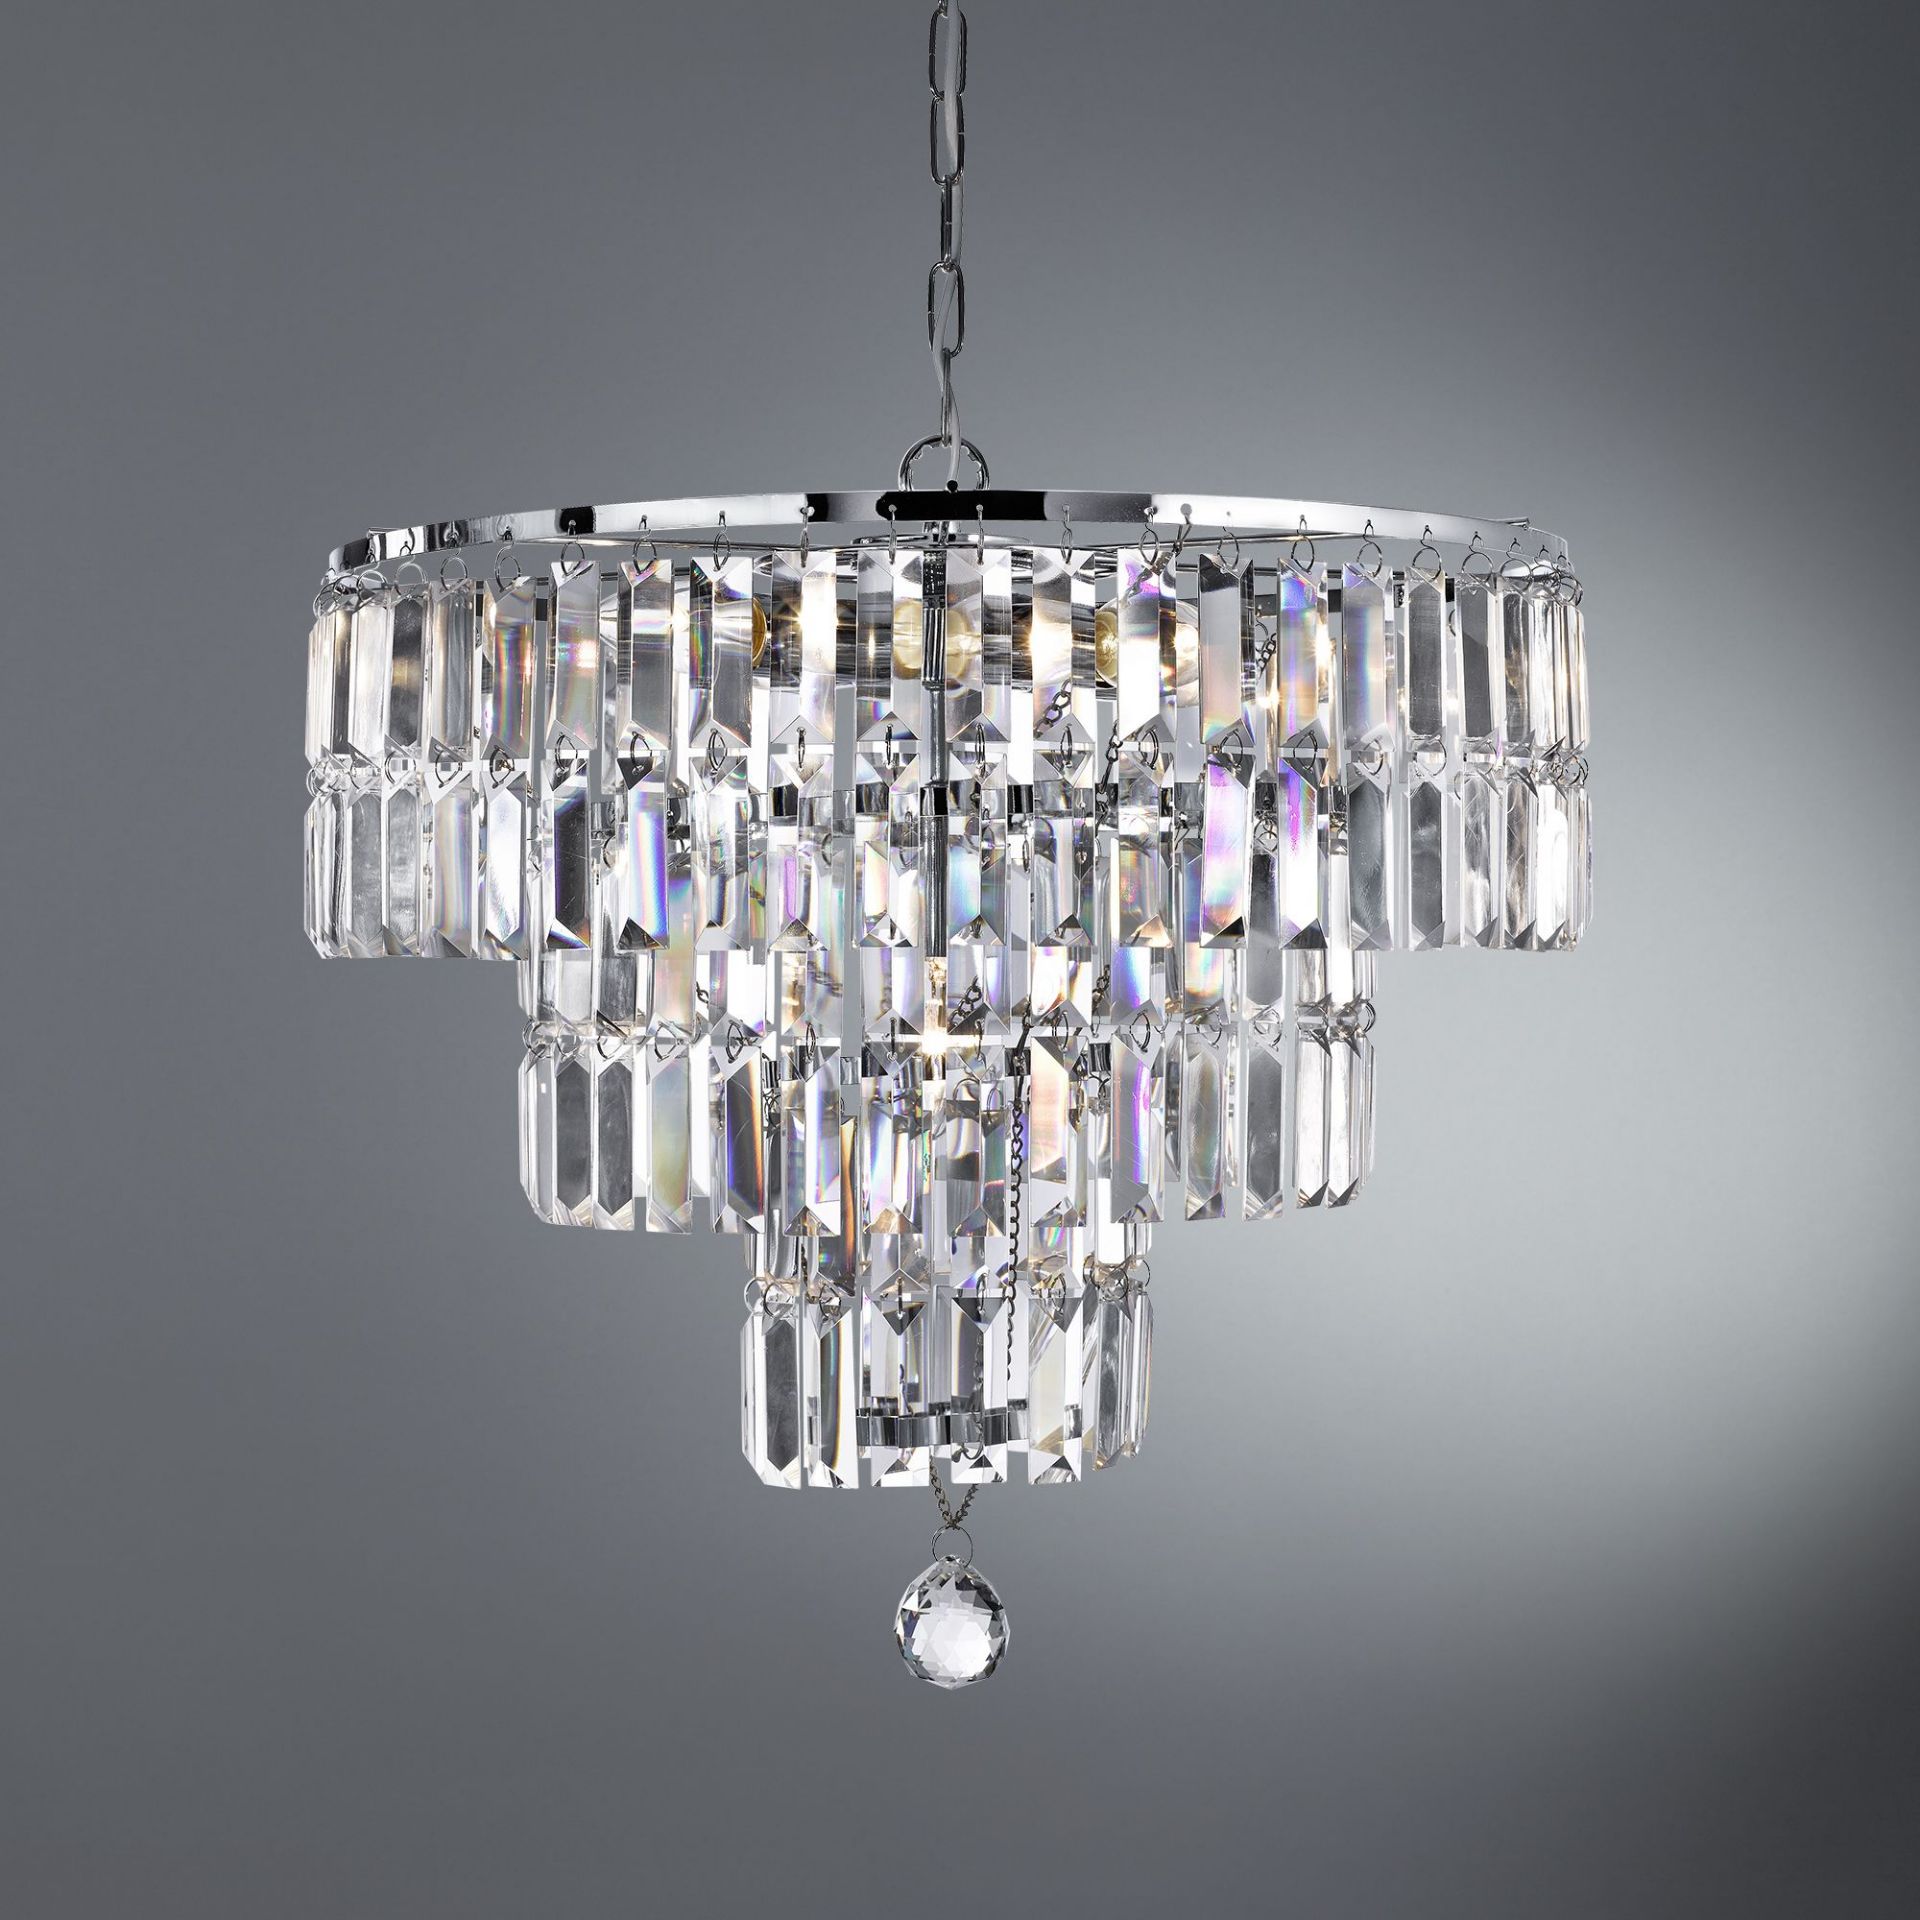 1 x Searchlight Empire 5 Light Crystal Ceiling Light Polished Chrome - Product Code 1375-5CC - New - Image 2 of 2